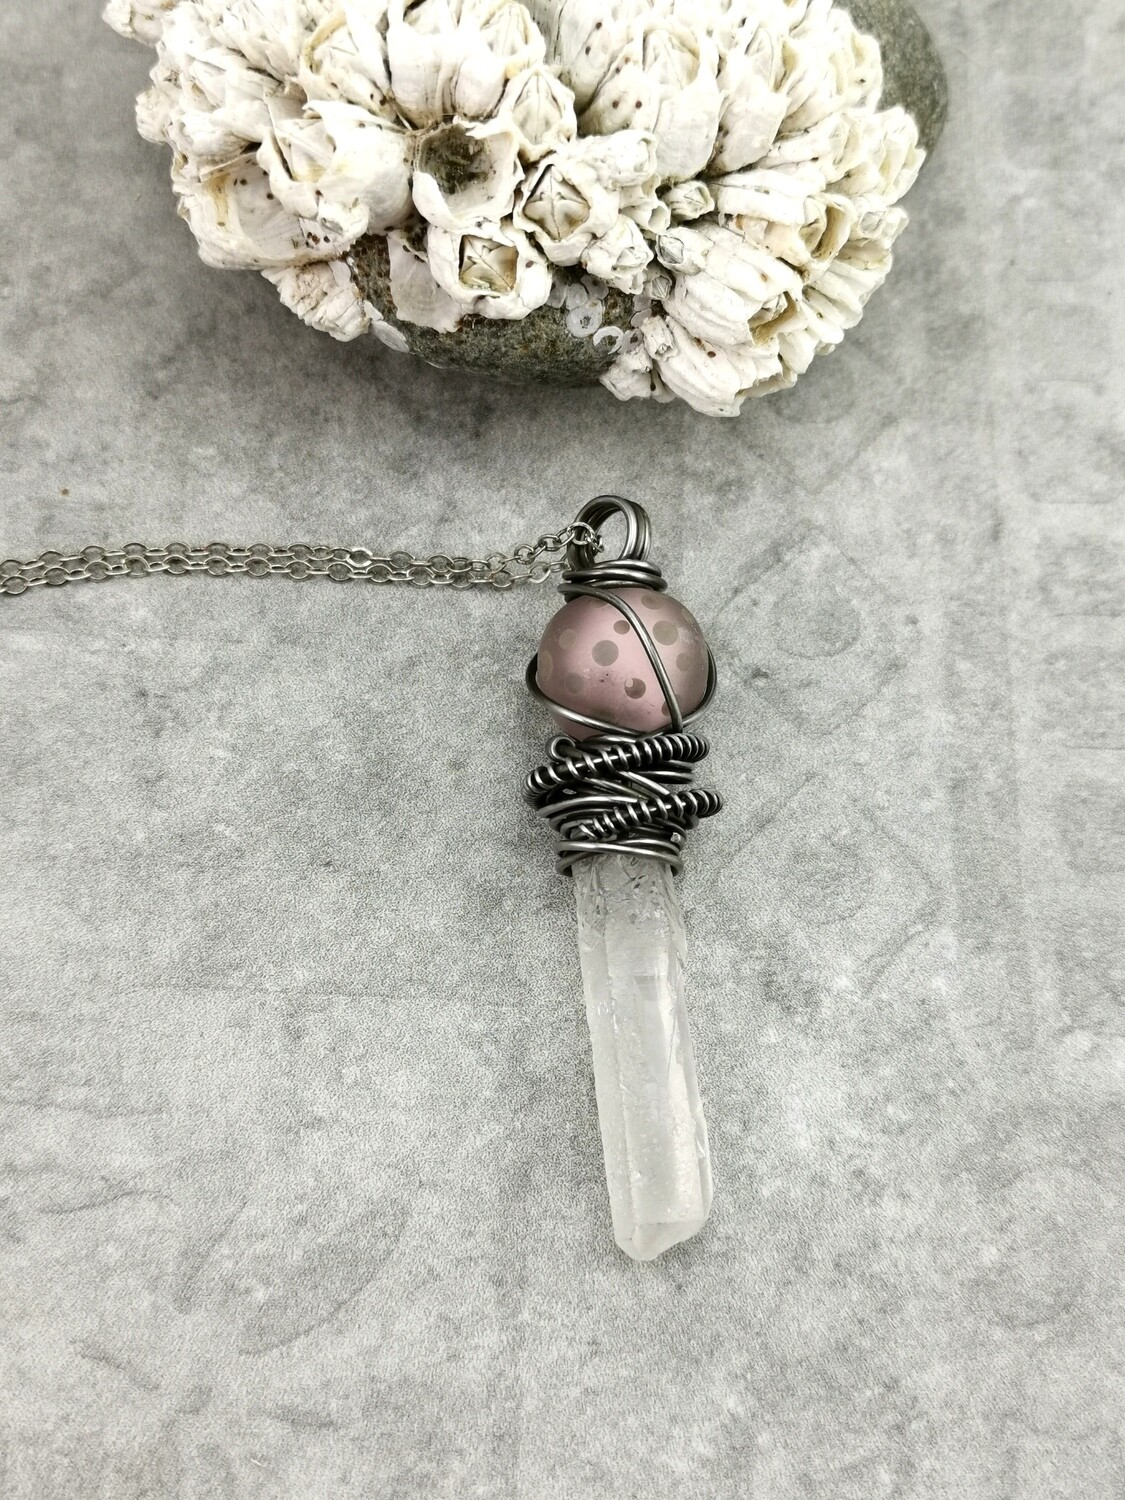 Crystal Healing, Crystal Quartz Points, Quartz Healing Stones, Reiki, Meditation, Lampwork, Crystal Pendant, Steel Wire Wrapped, Steel Wire, Pendant, Necklace, Gifts for Her, One of a Kind